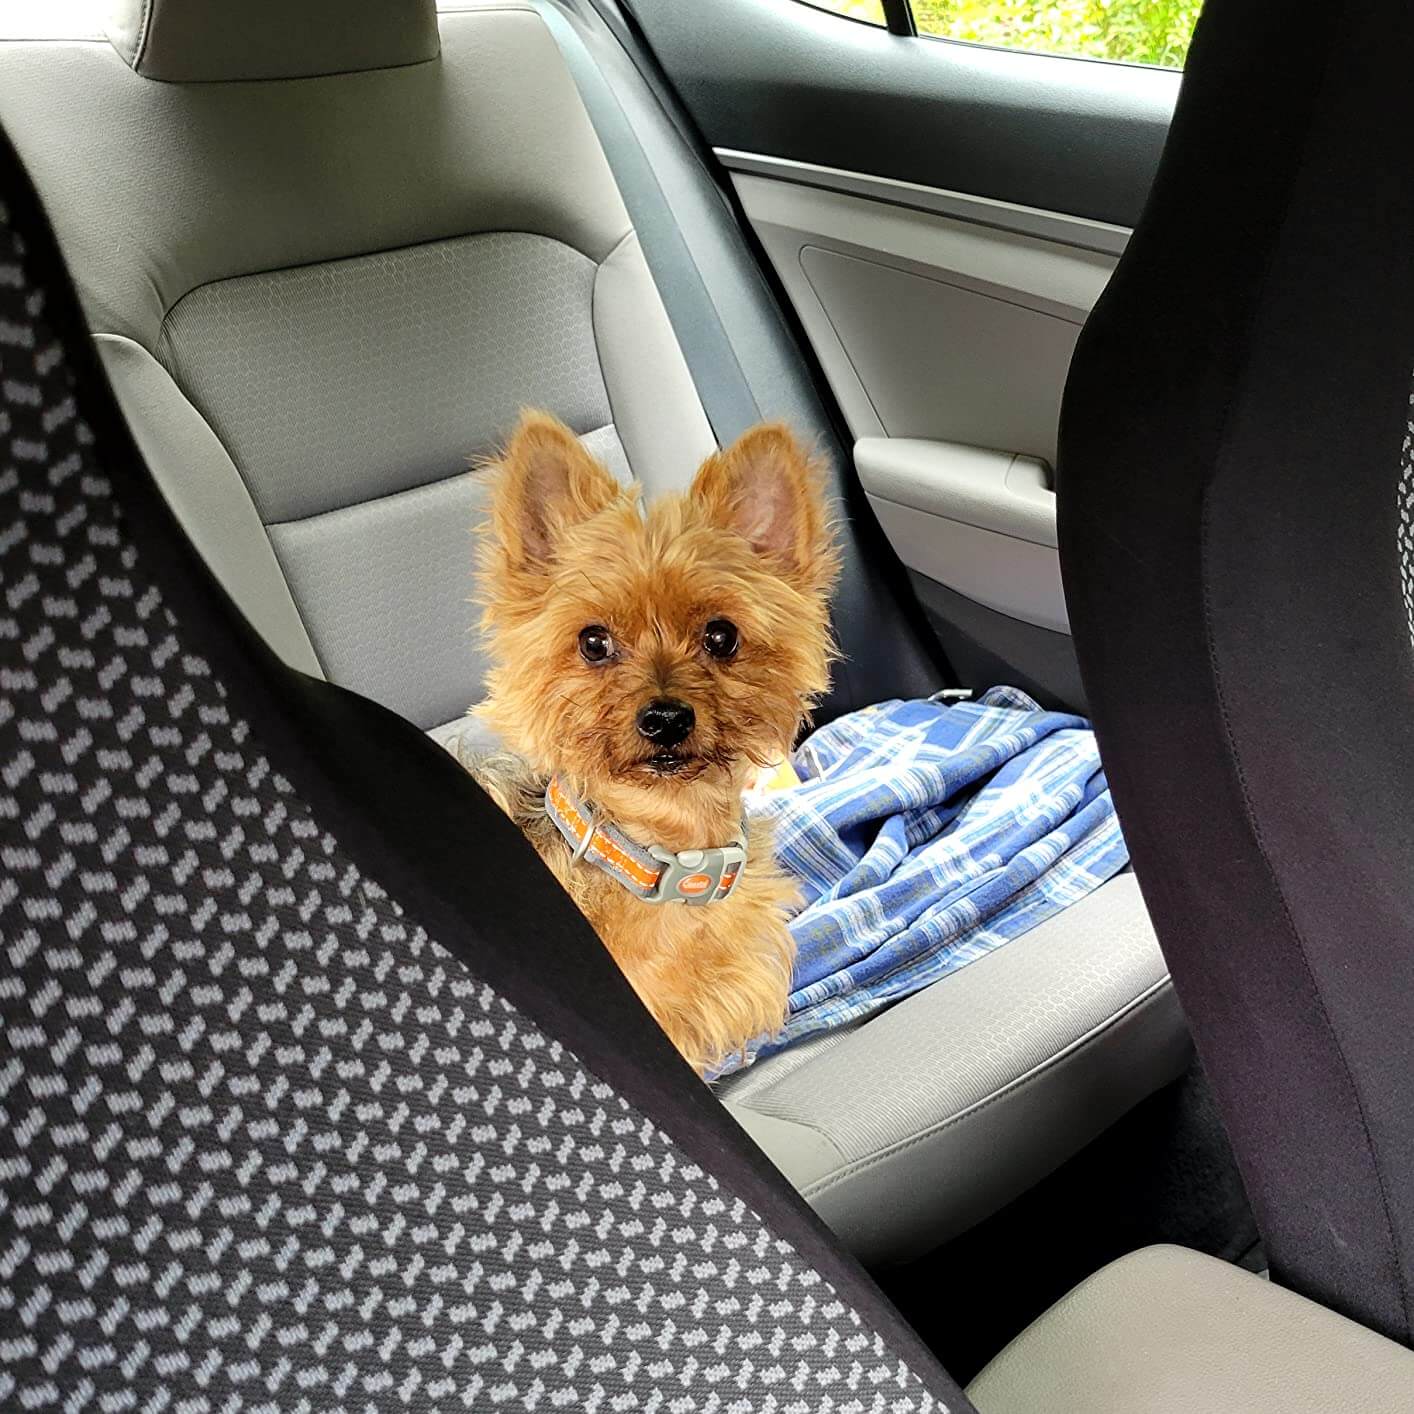 A small brown dog on the back seat of a car